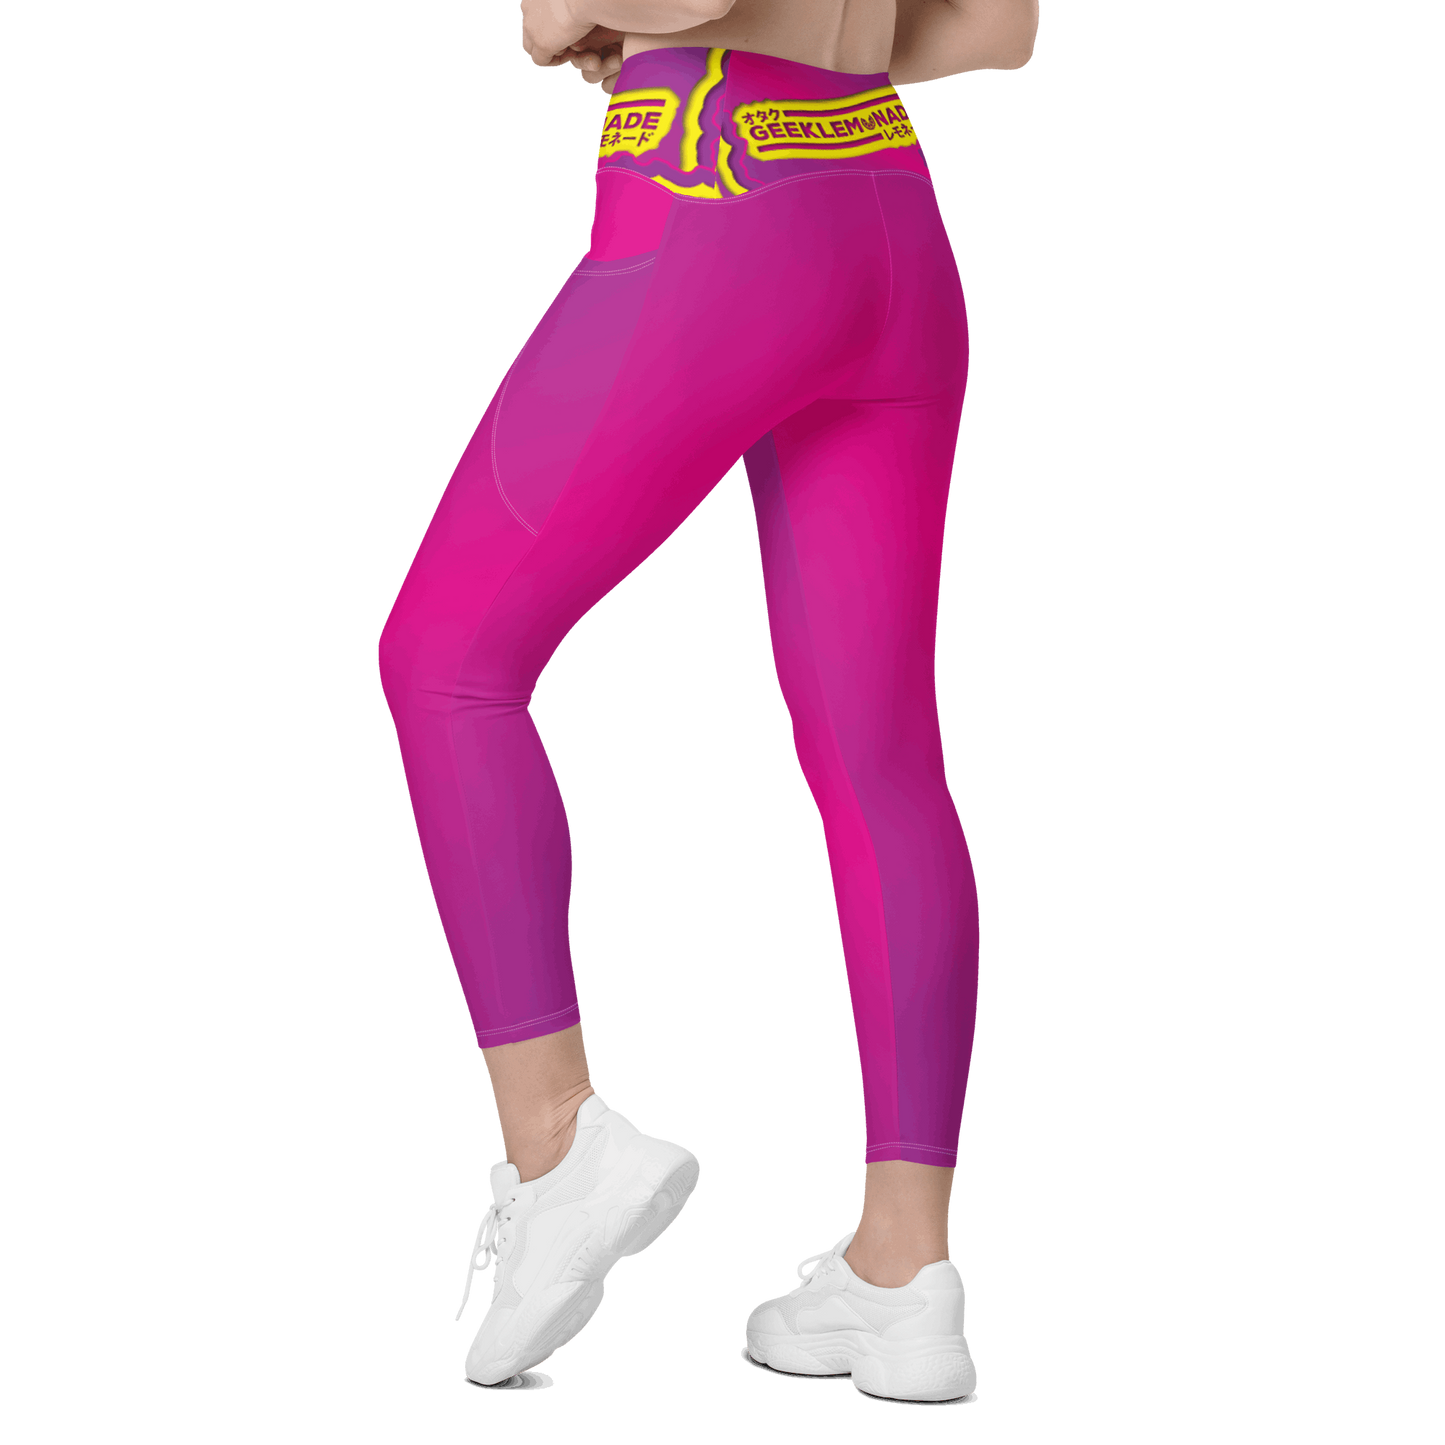 Geek's Pink & Purp - Pink Crossover leggings with pockets